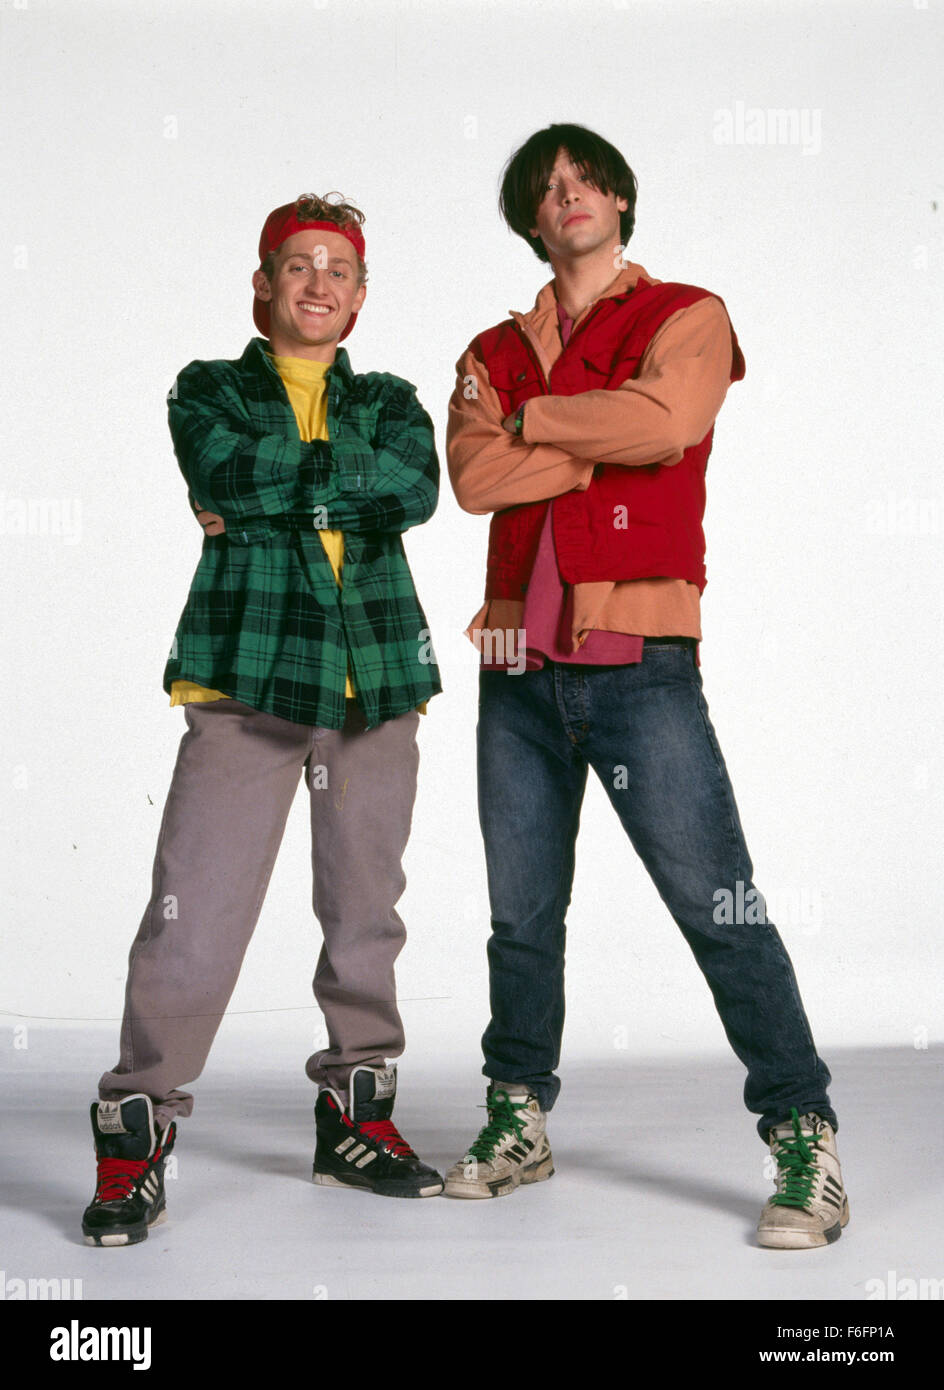 Jul 19, 1991; Los Angeles, CA, USA; ALEX WINTERS (left) as Bill S. Preston, Esq. and KEANU REEVES as Ted Logan in the adventure, sci-fi, comic film 'Bill and Ted's Bogus Journey' directed by Peter Hewitt. Stock Photo